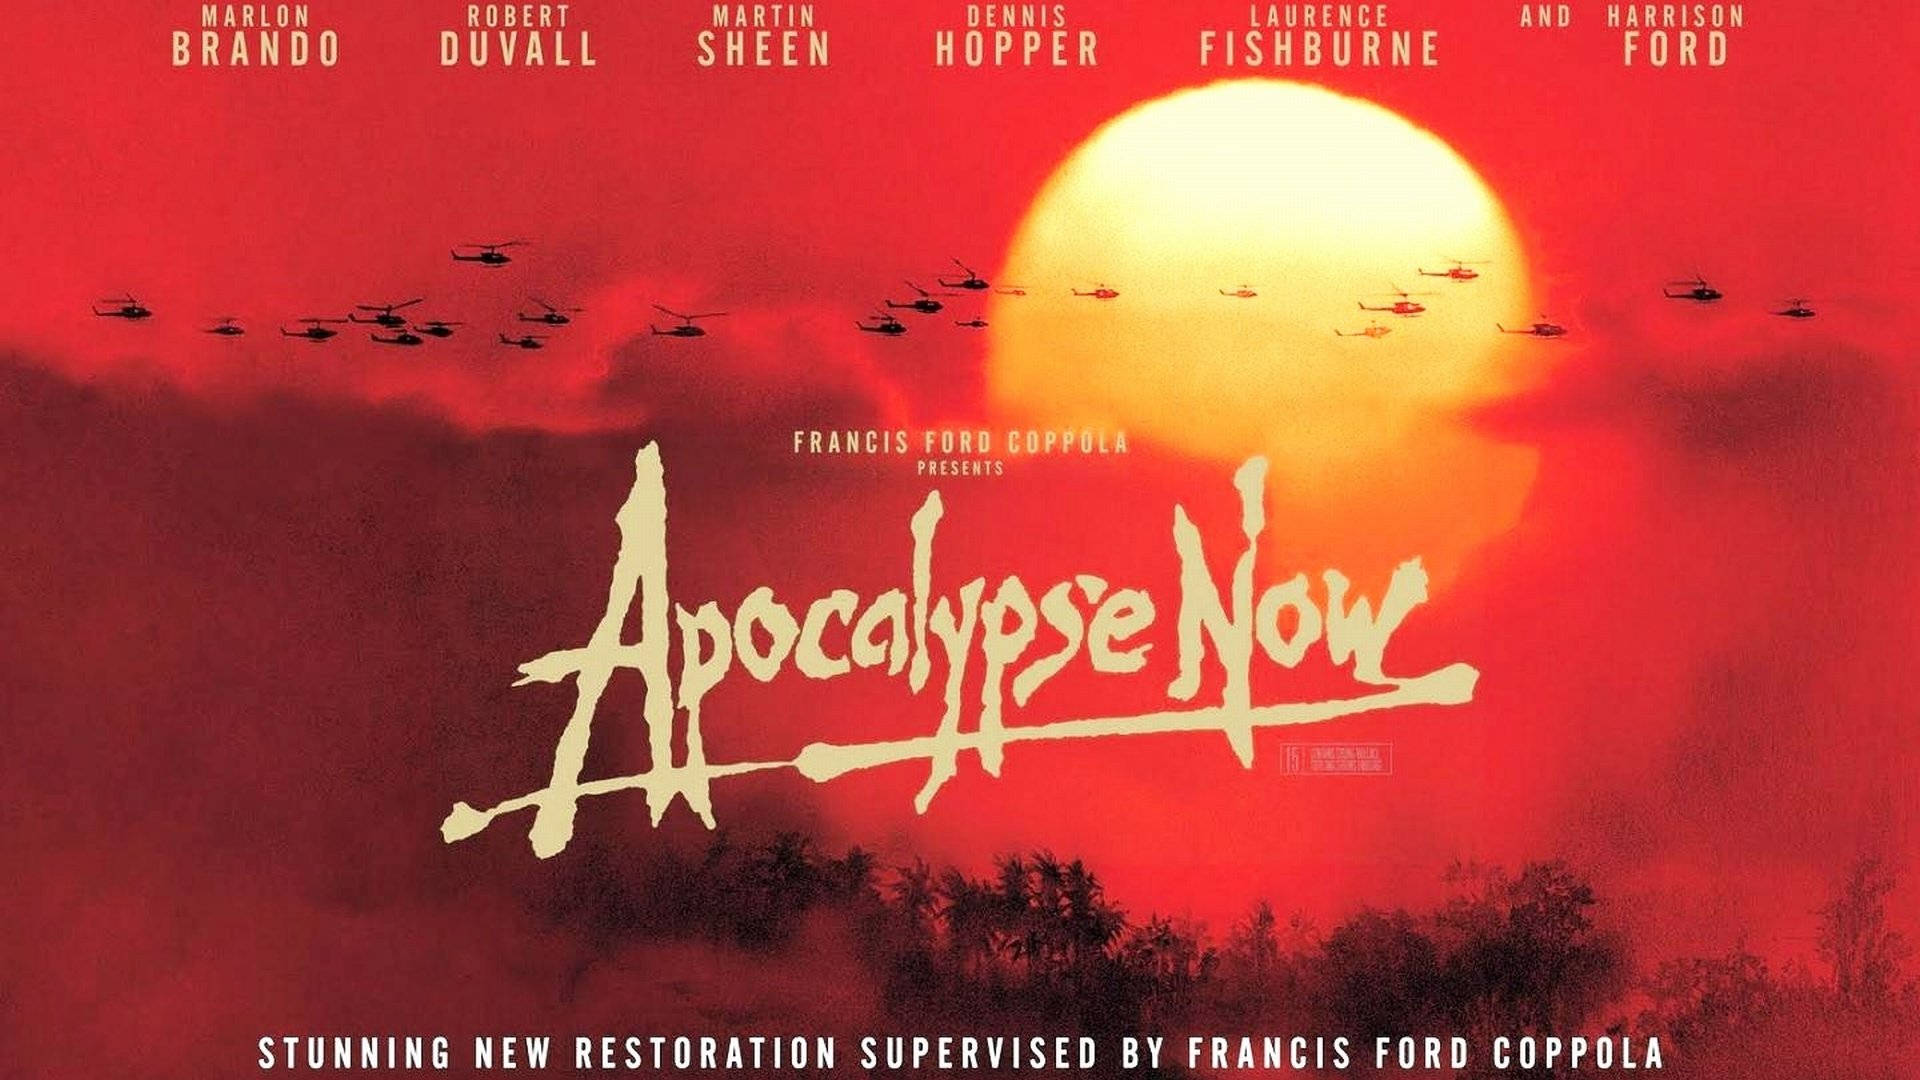 The intense drama of war captured in the iconic scene from Apocalypse Now. Wallpaper